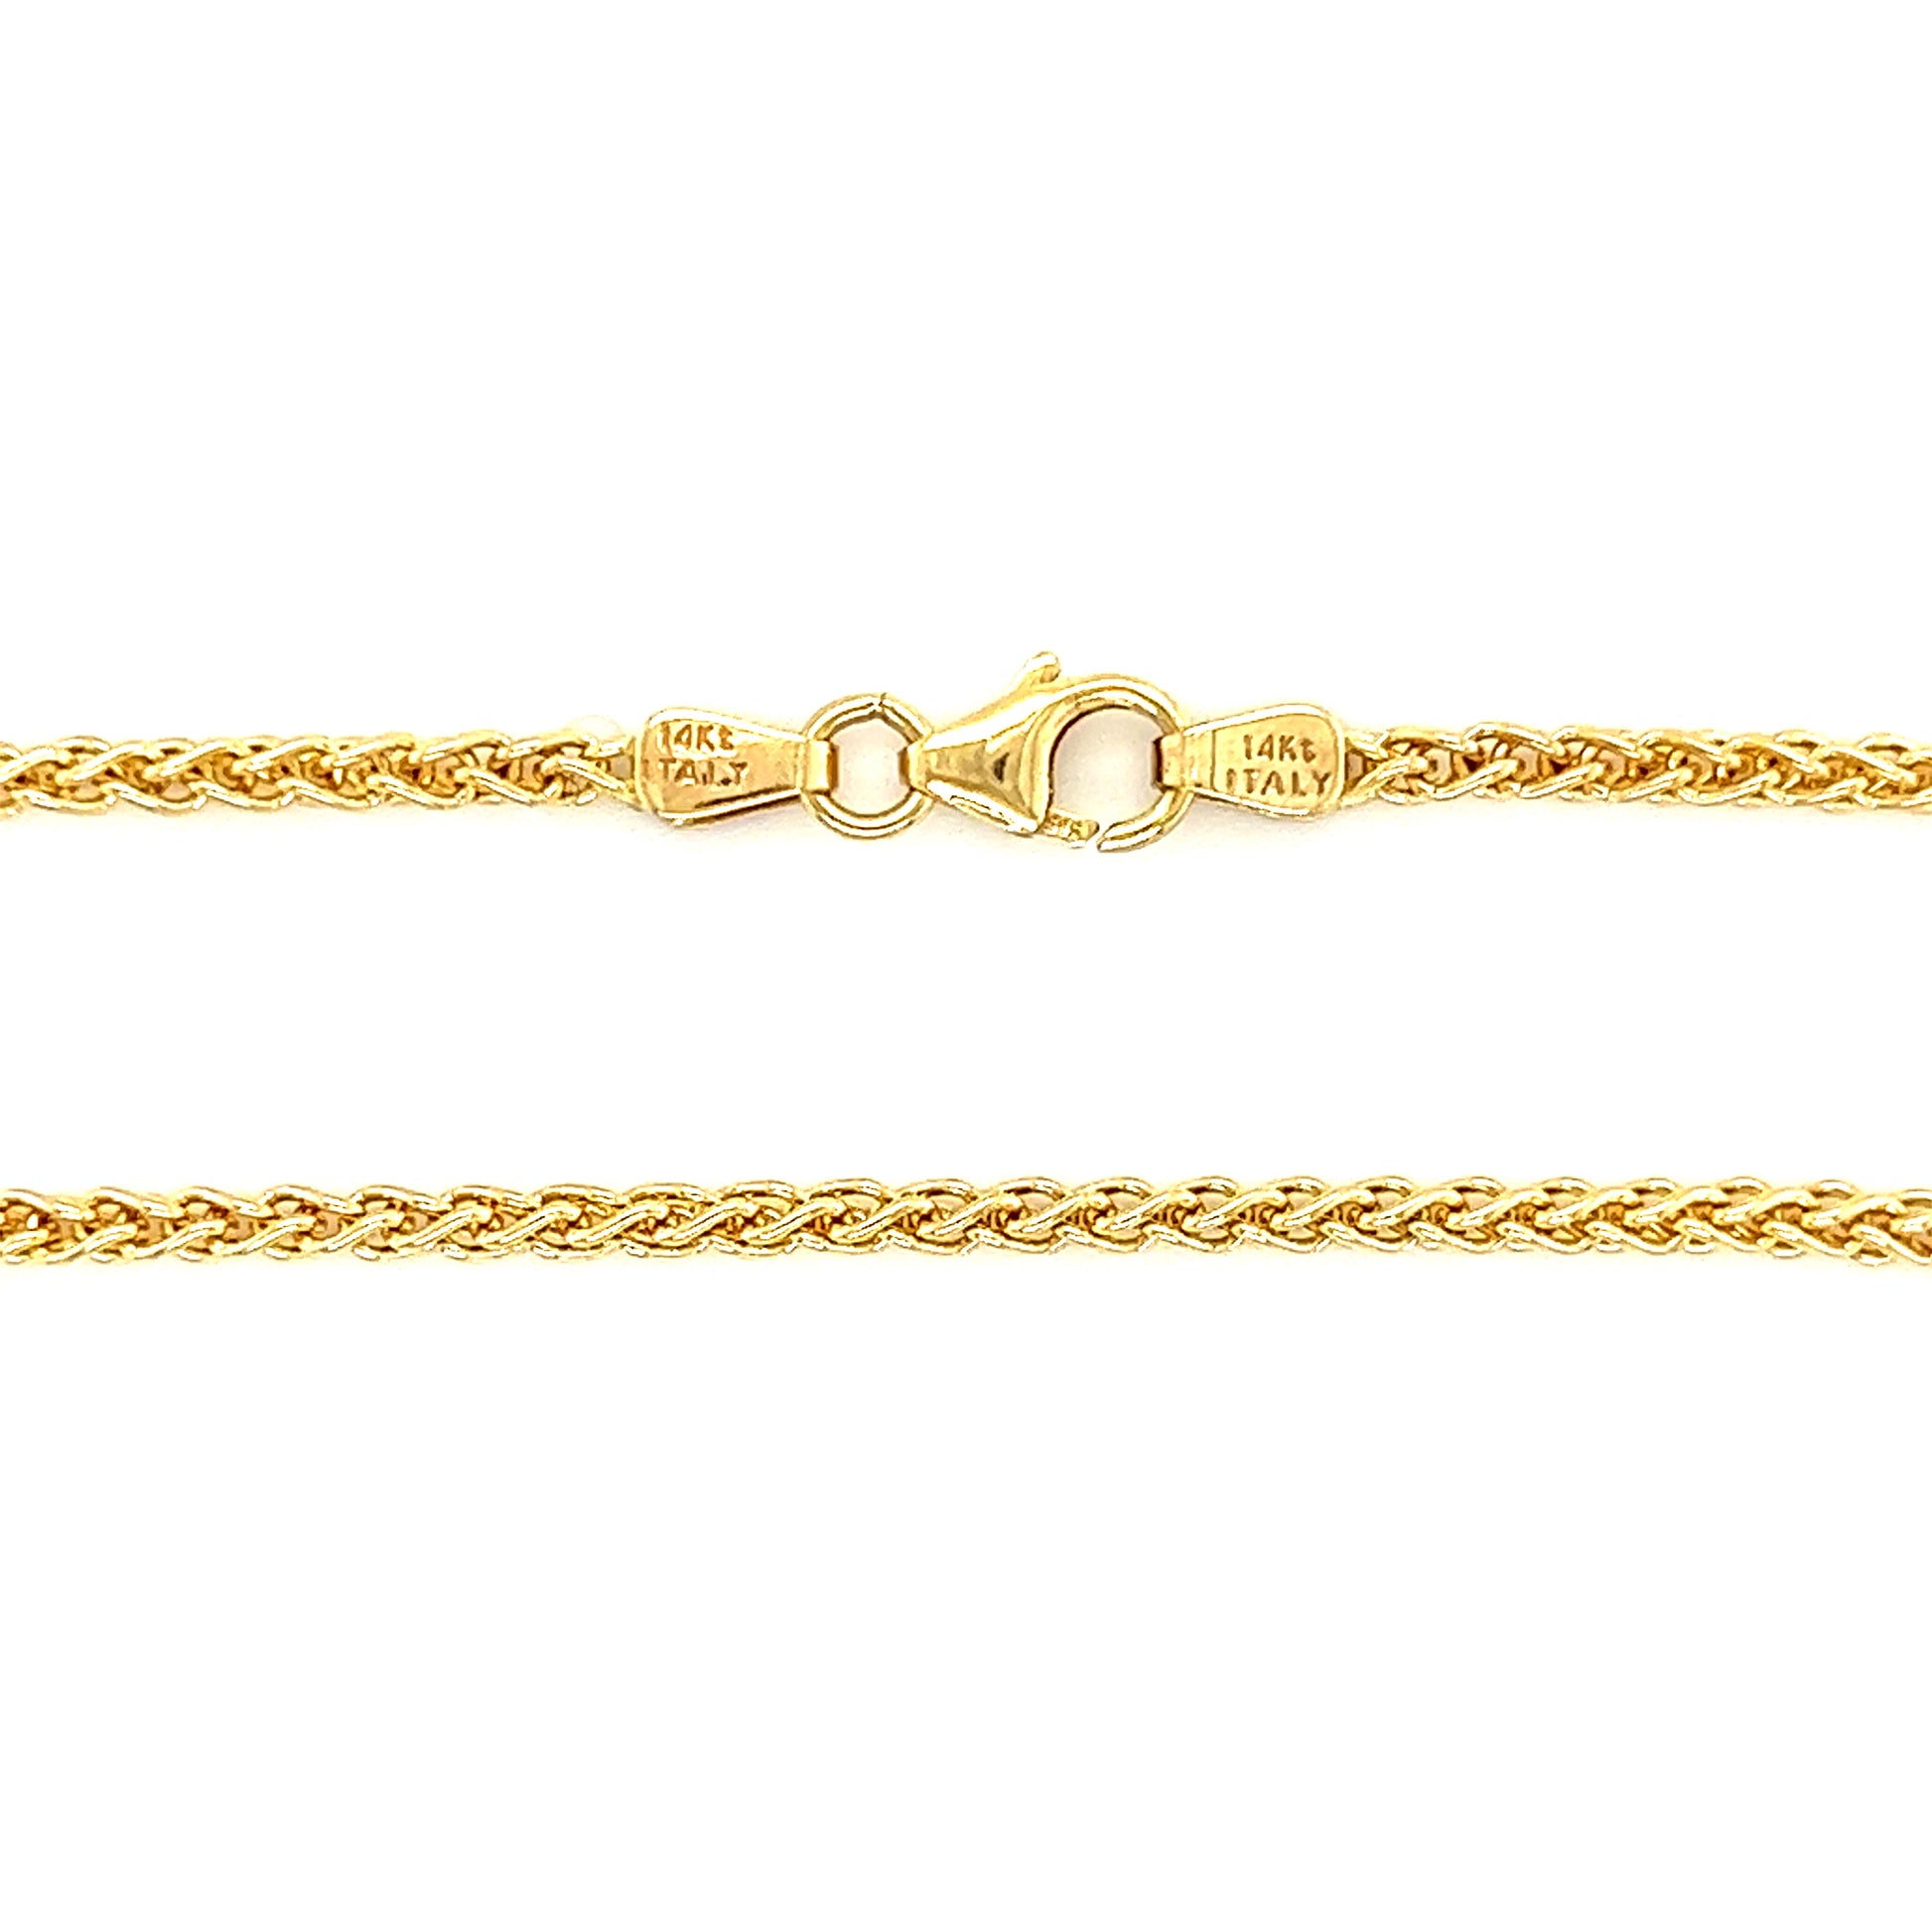 Wheat 2.1mm Chain with 18in Length in 14K Yellow Gold Chain and Clasp View